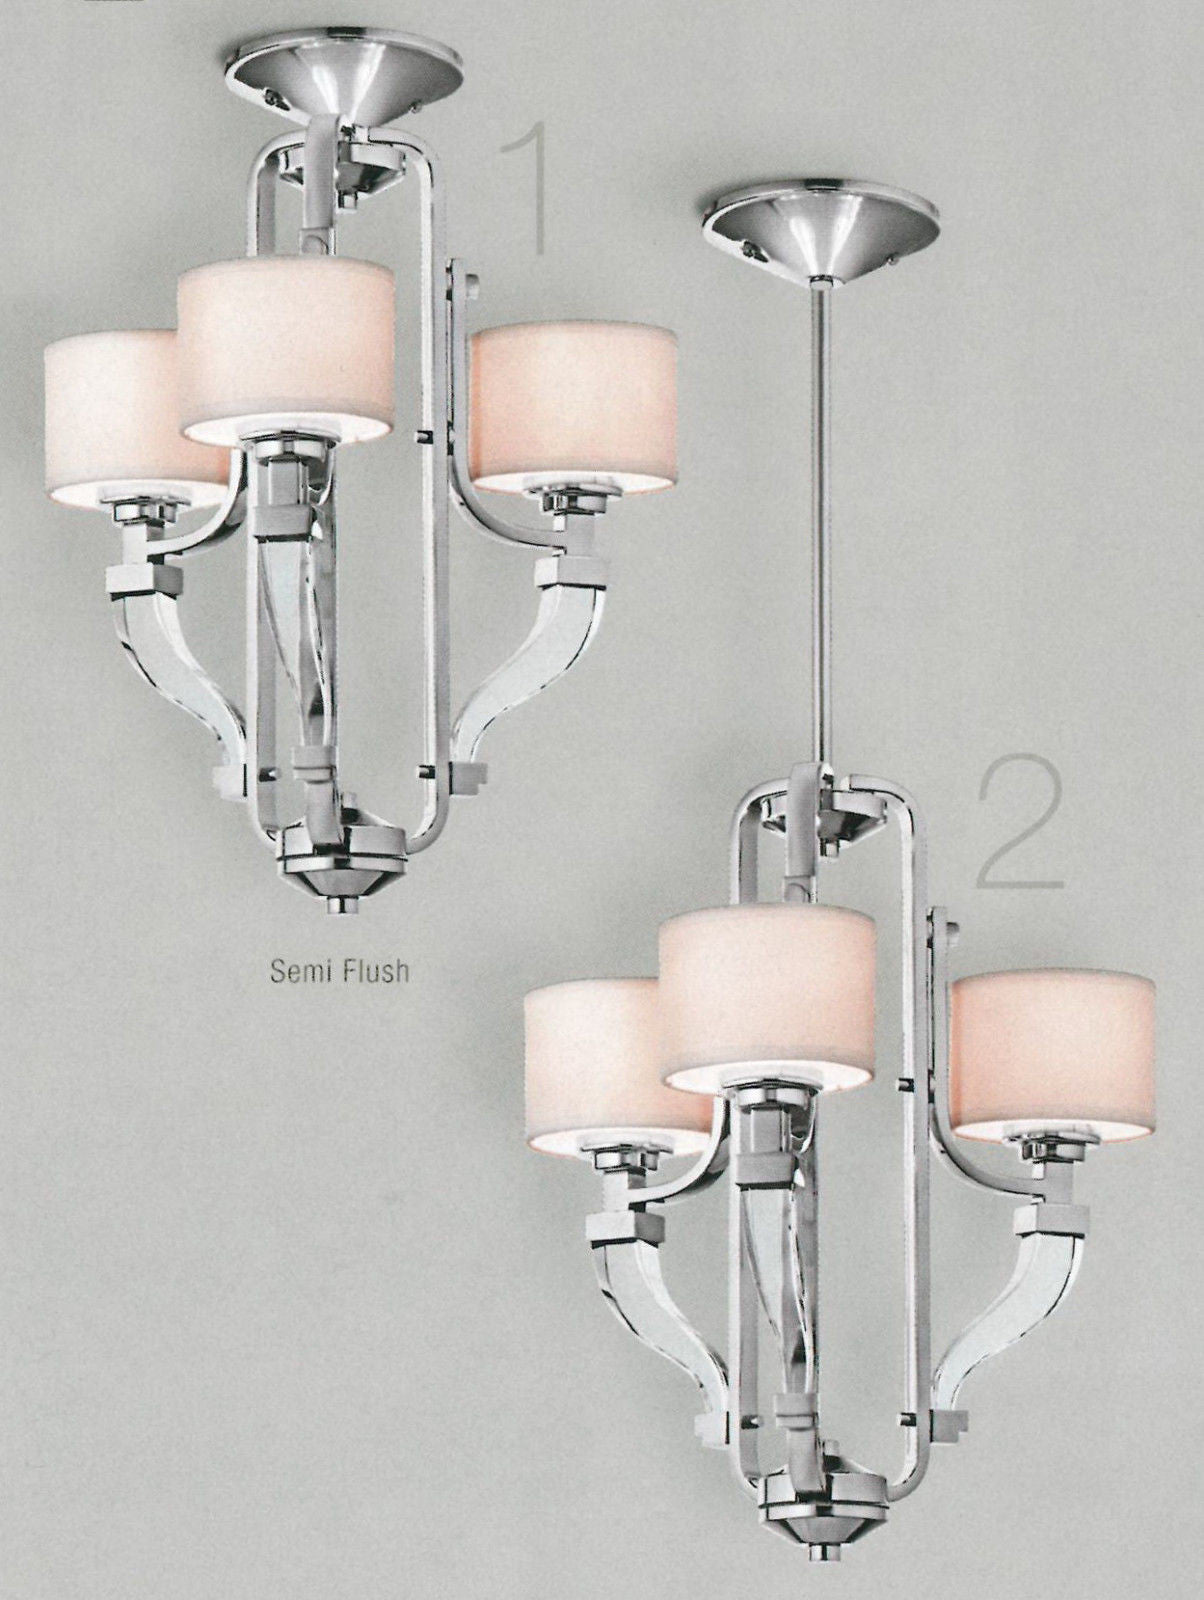 Aztec 34665 by Kichler Lighting Three Light Point Claire Convertible Chandelier or Semi Flush Ceiling Mount in Chrome Finish